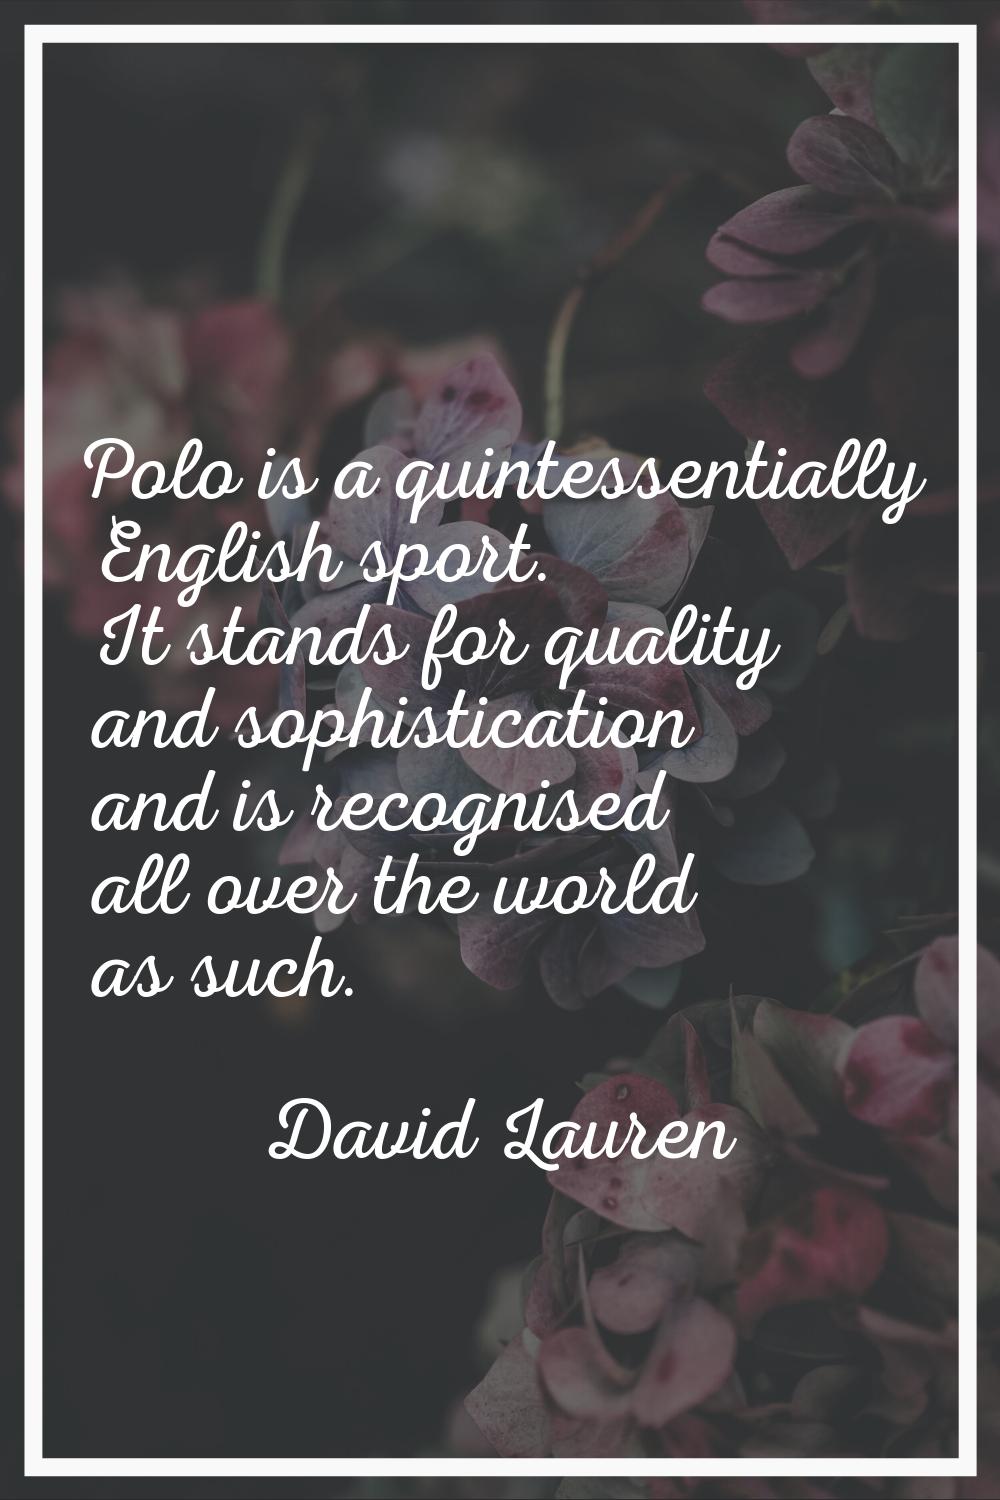 Polo is a quintessentially English sport. It stands for quality and sophistication and is recognise